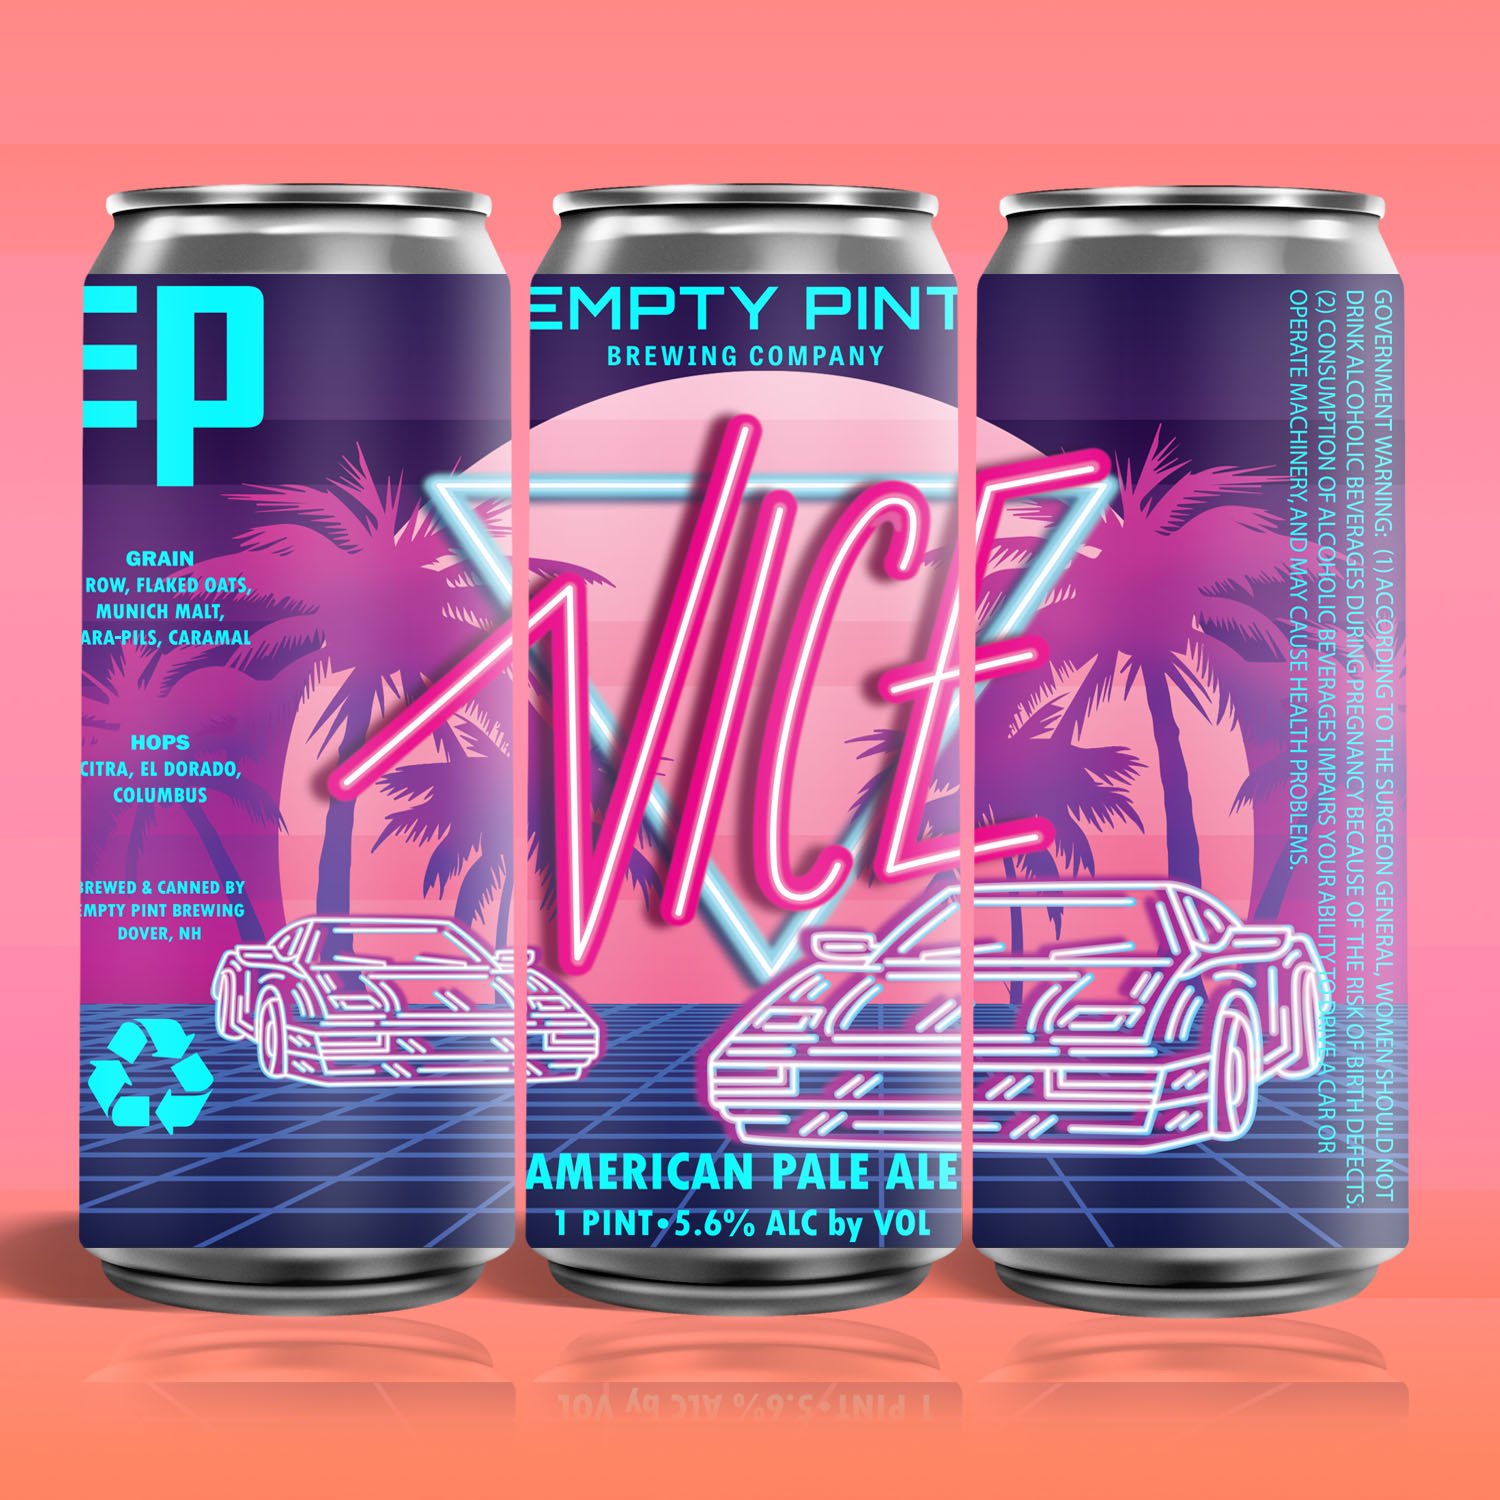 Vice Cans.jpg